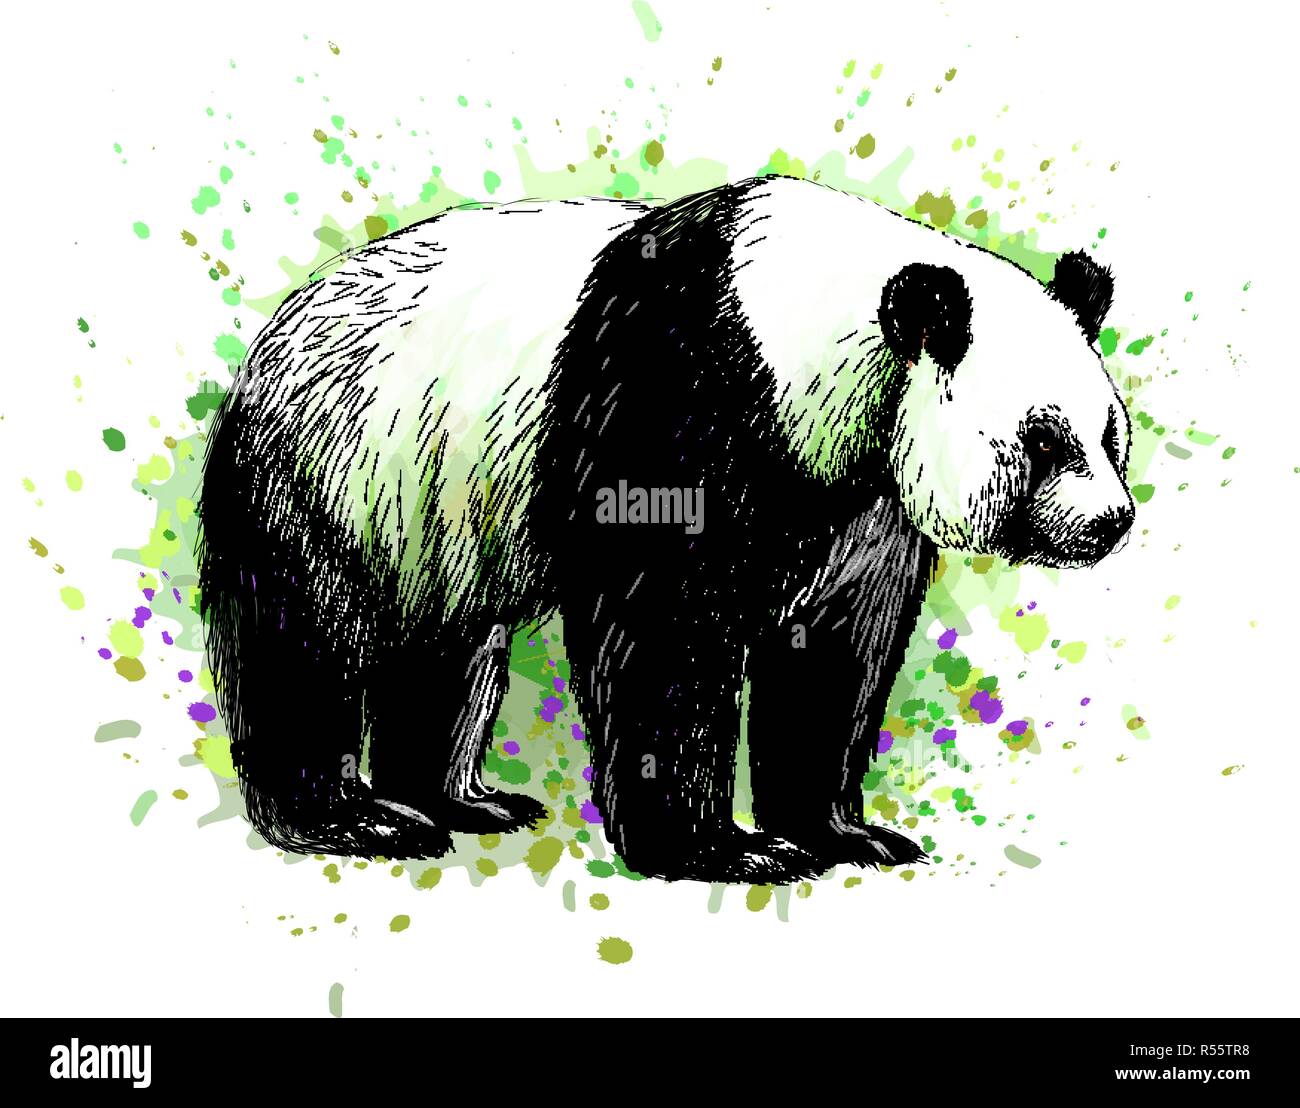 Portrait of a Panda bear from a splash of watercolor Stock Vector